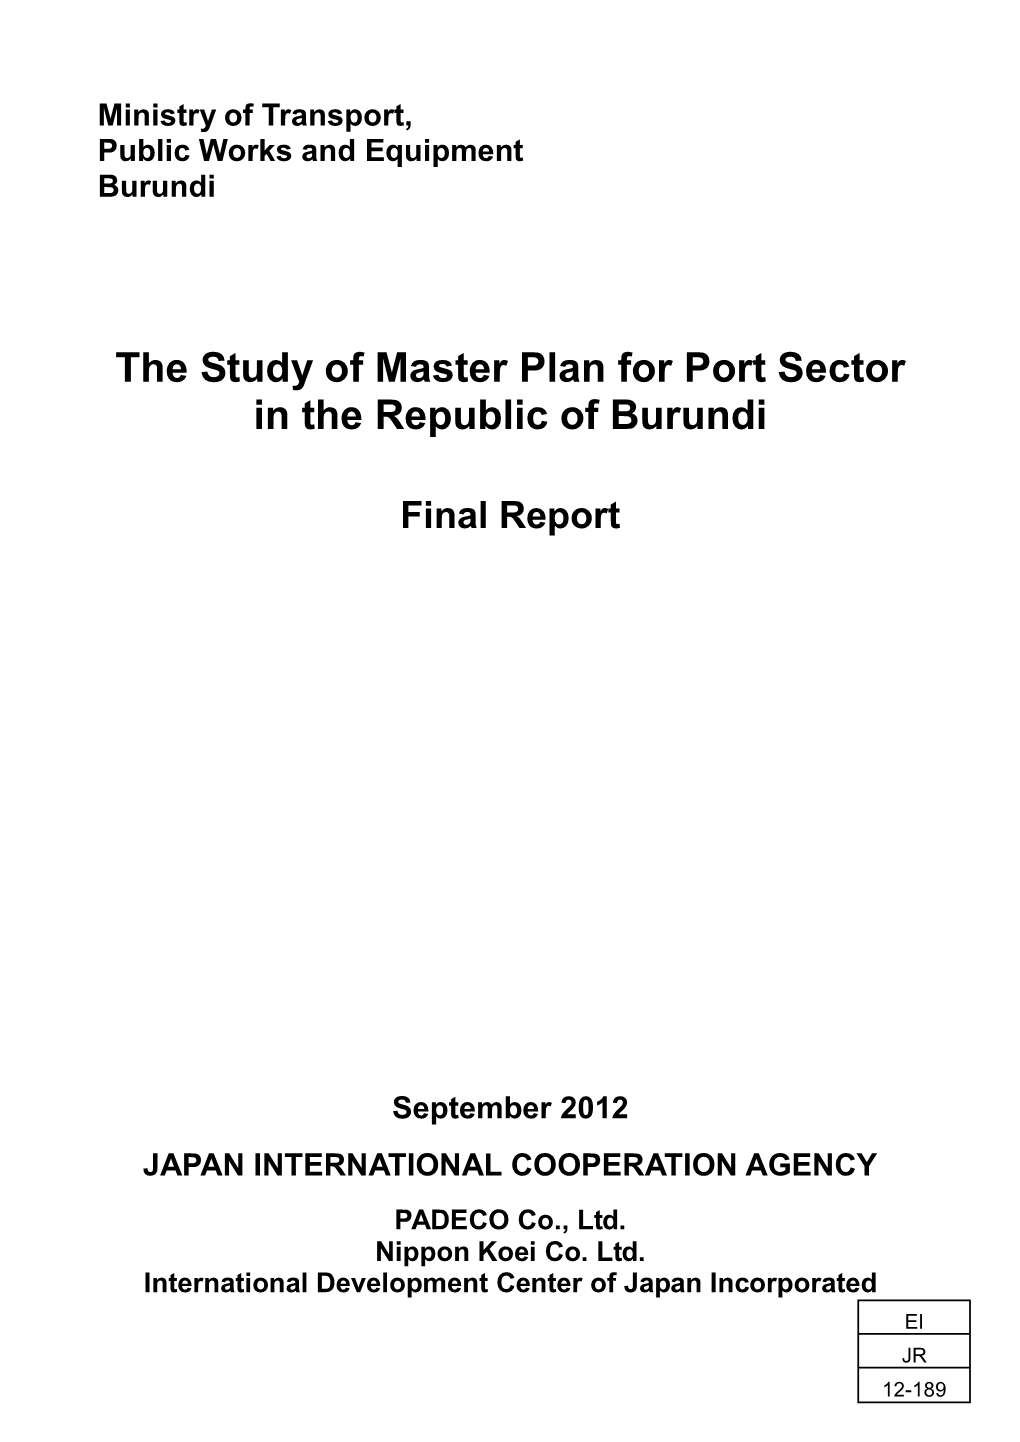 The Study of Master Plan for Port Sector in the Republic of Burundi